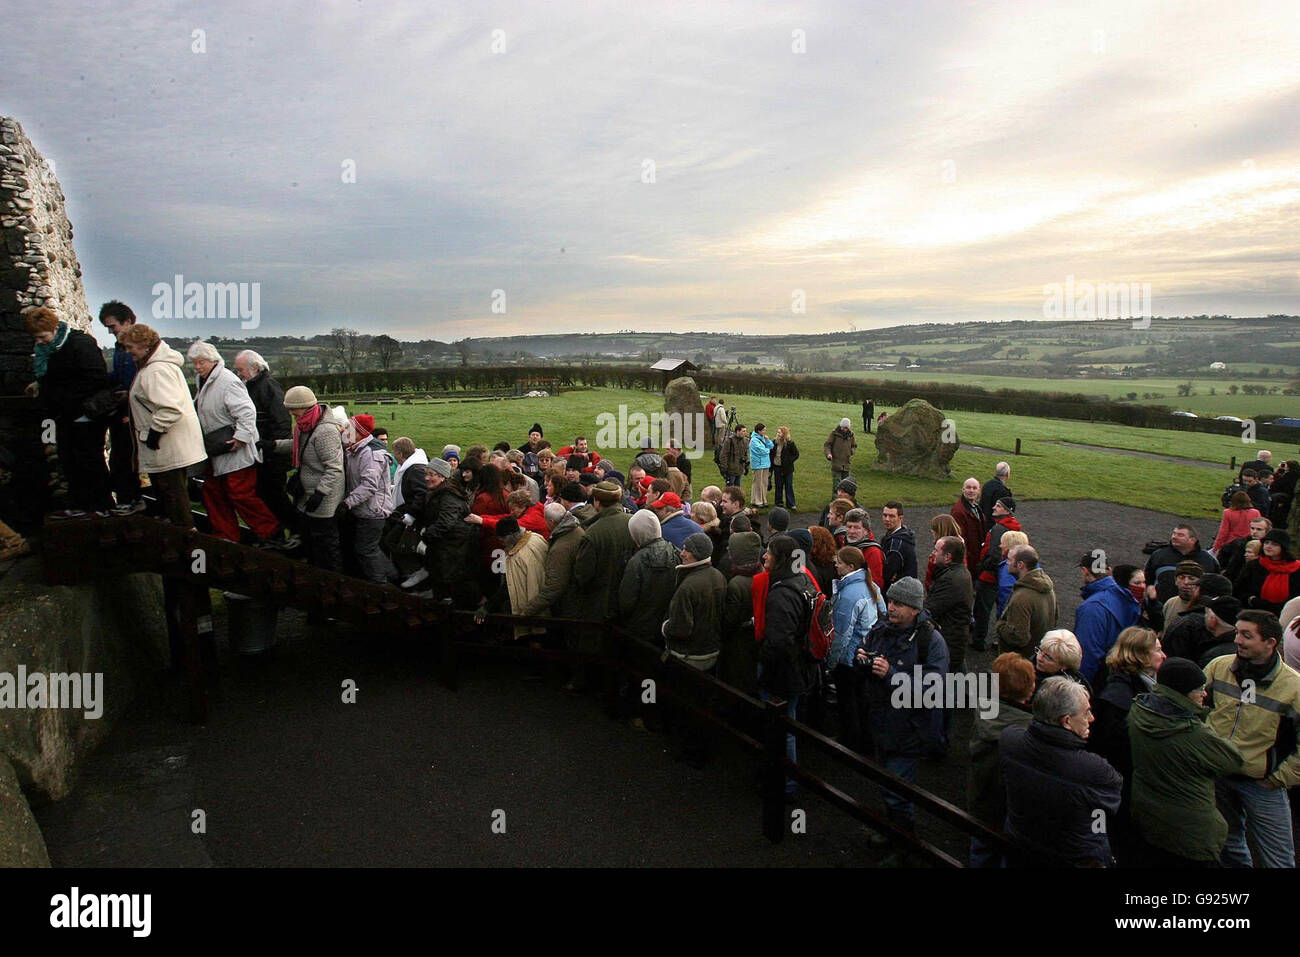 Hundreds gather at Newgrange Neolithic Tomb in County Meath, Wednesday December 21, 2005, for the annual December 21st solstice. It is thought the Neolithics built Newgrange over 5,000 years ago so that the sun shone on the ashes of their dead in the tomb, representing a sign of rebirth. See PA Story NATURE Solstice. PRESS ASSOCIATION Photo. Photo credit should read: Niall Carson/PA Stock Photo